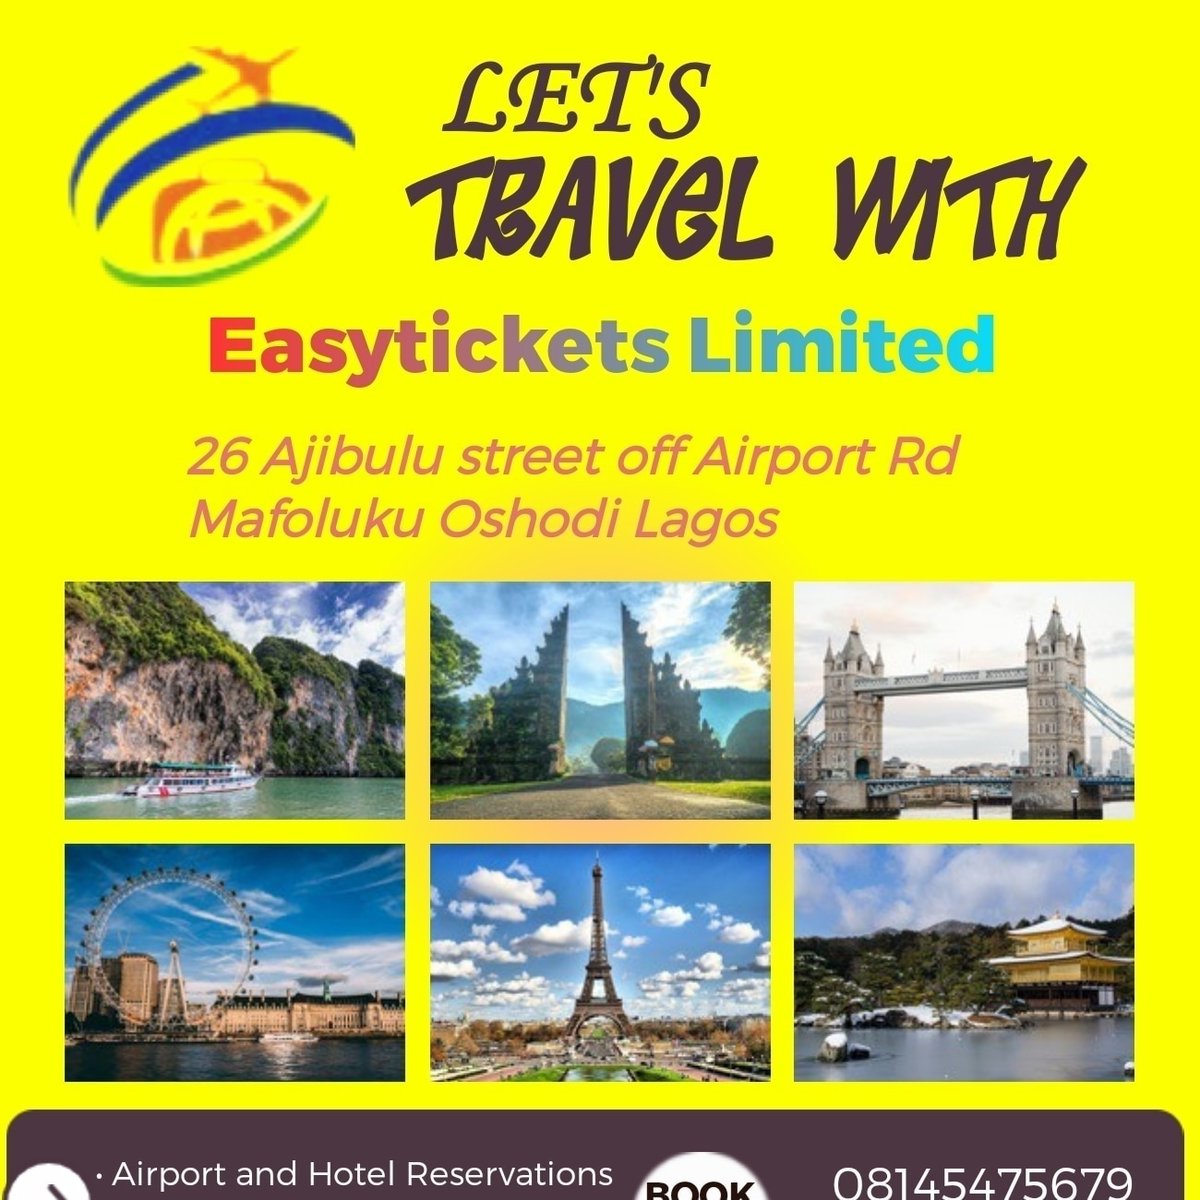 We will provide you with all the information you might need for all your upcoming trips.@Goeasyaviation company.contact us today on the following lines:08145475679,08146523478,08177302725.